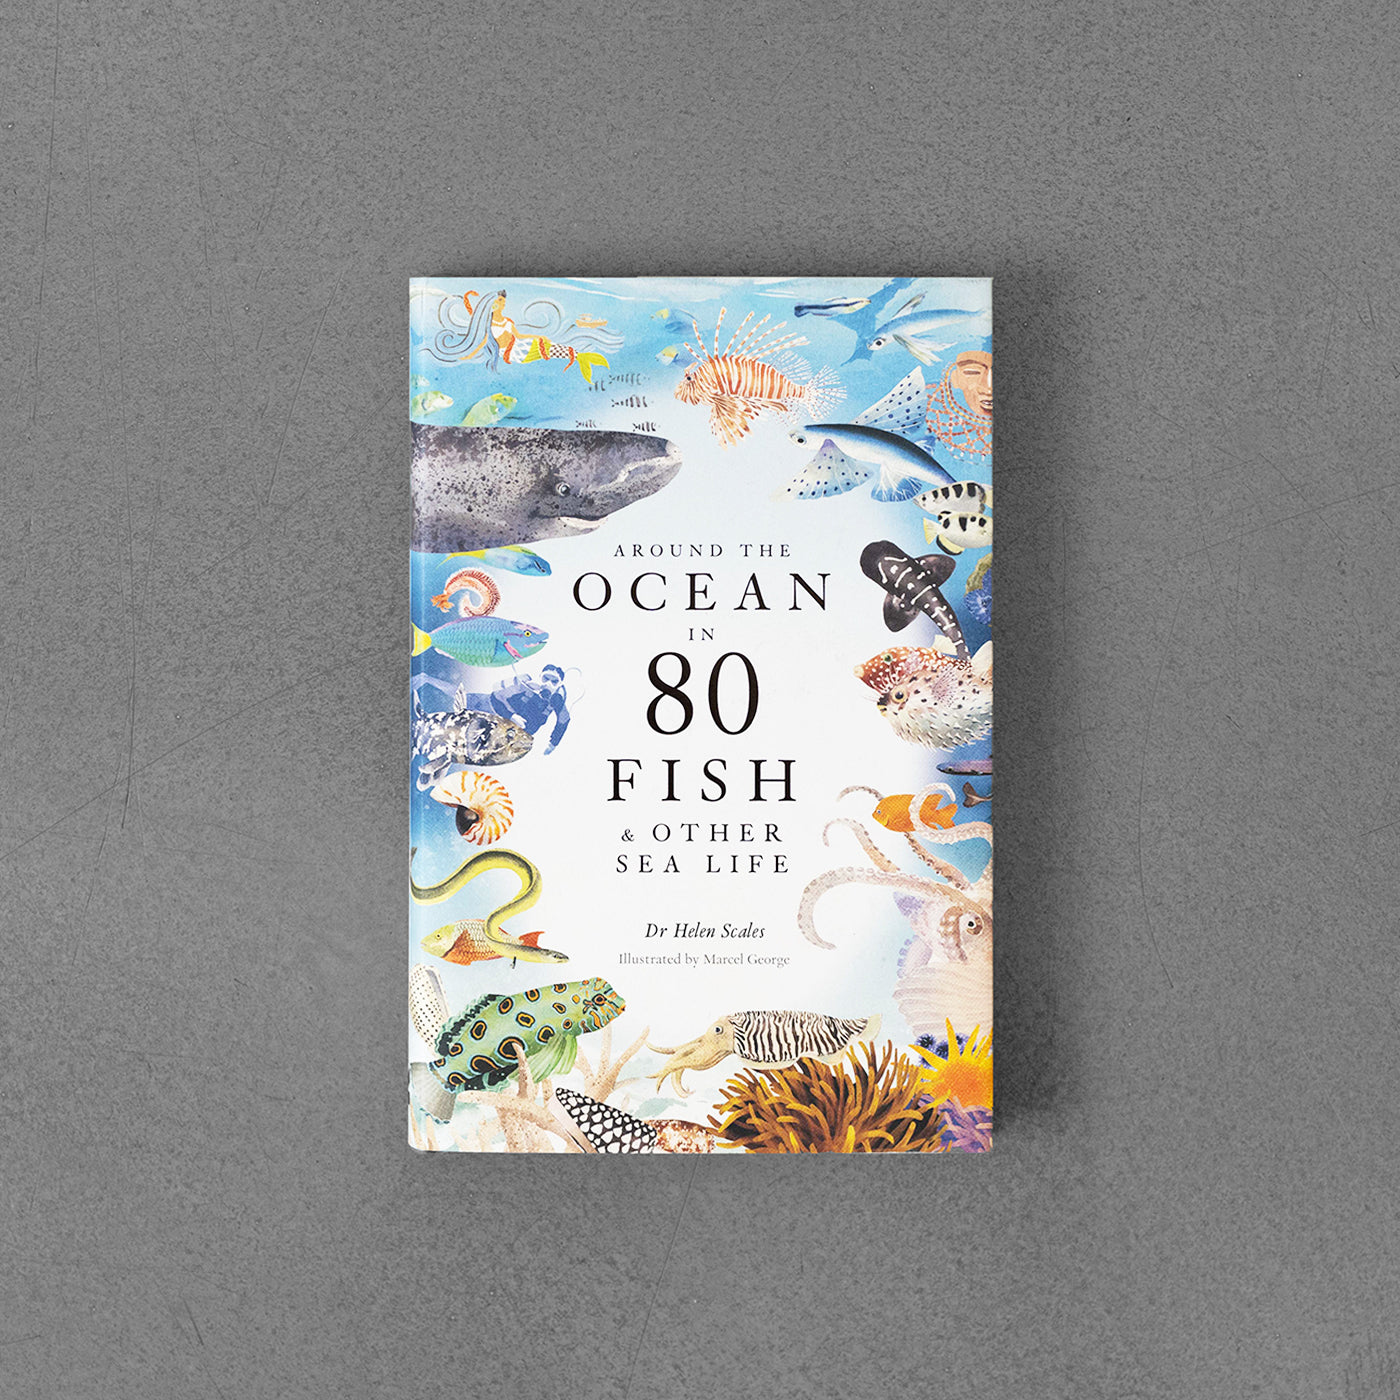 Around the Ocean in 80 Fish and Other Sea Life